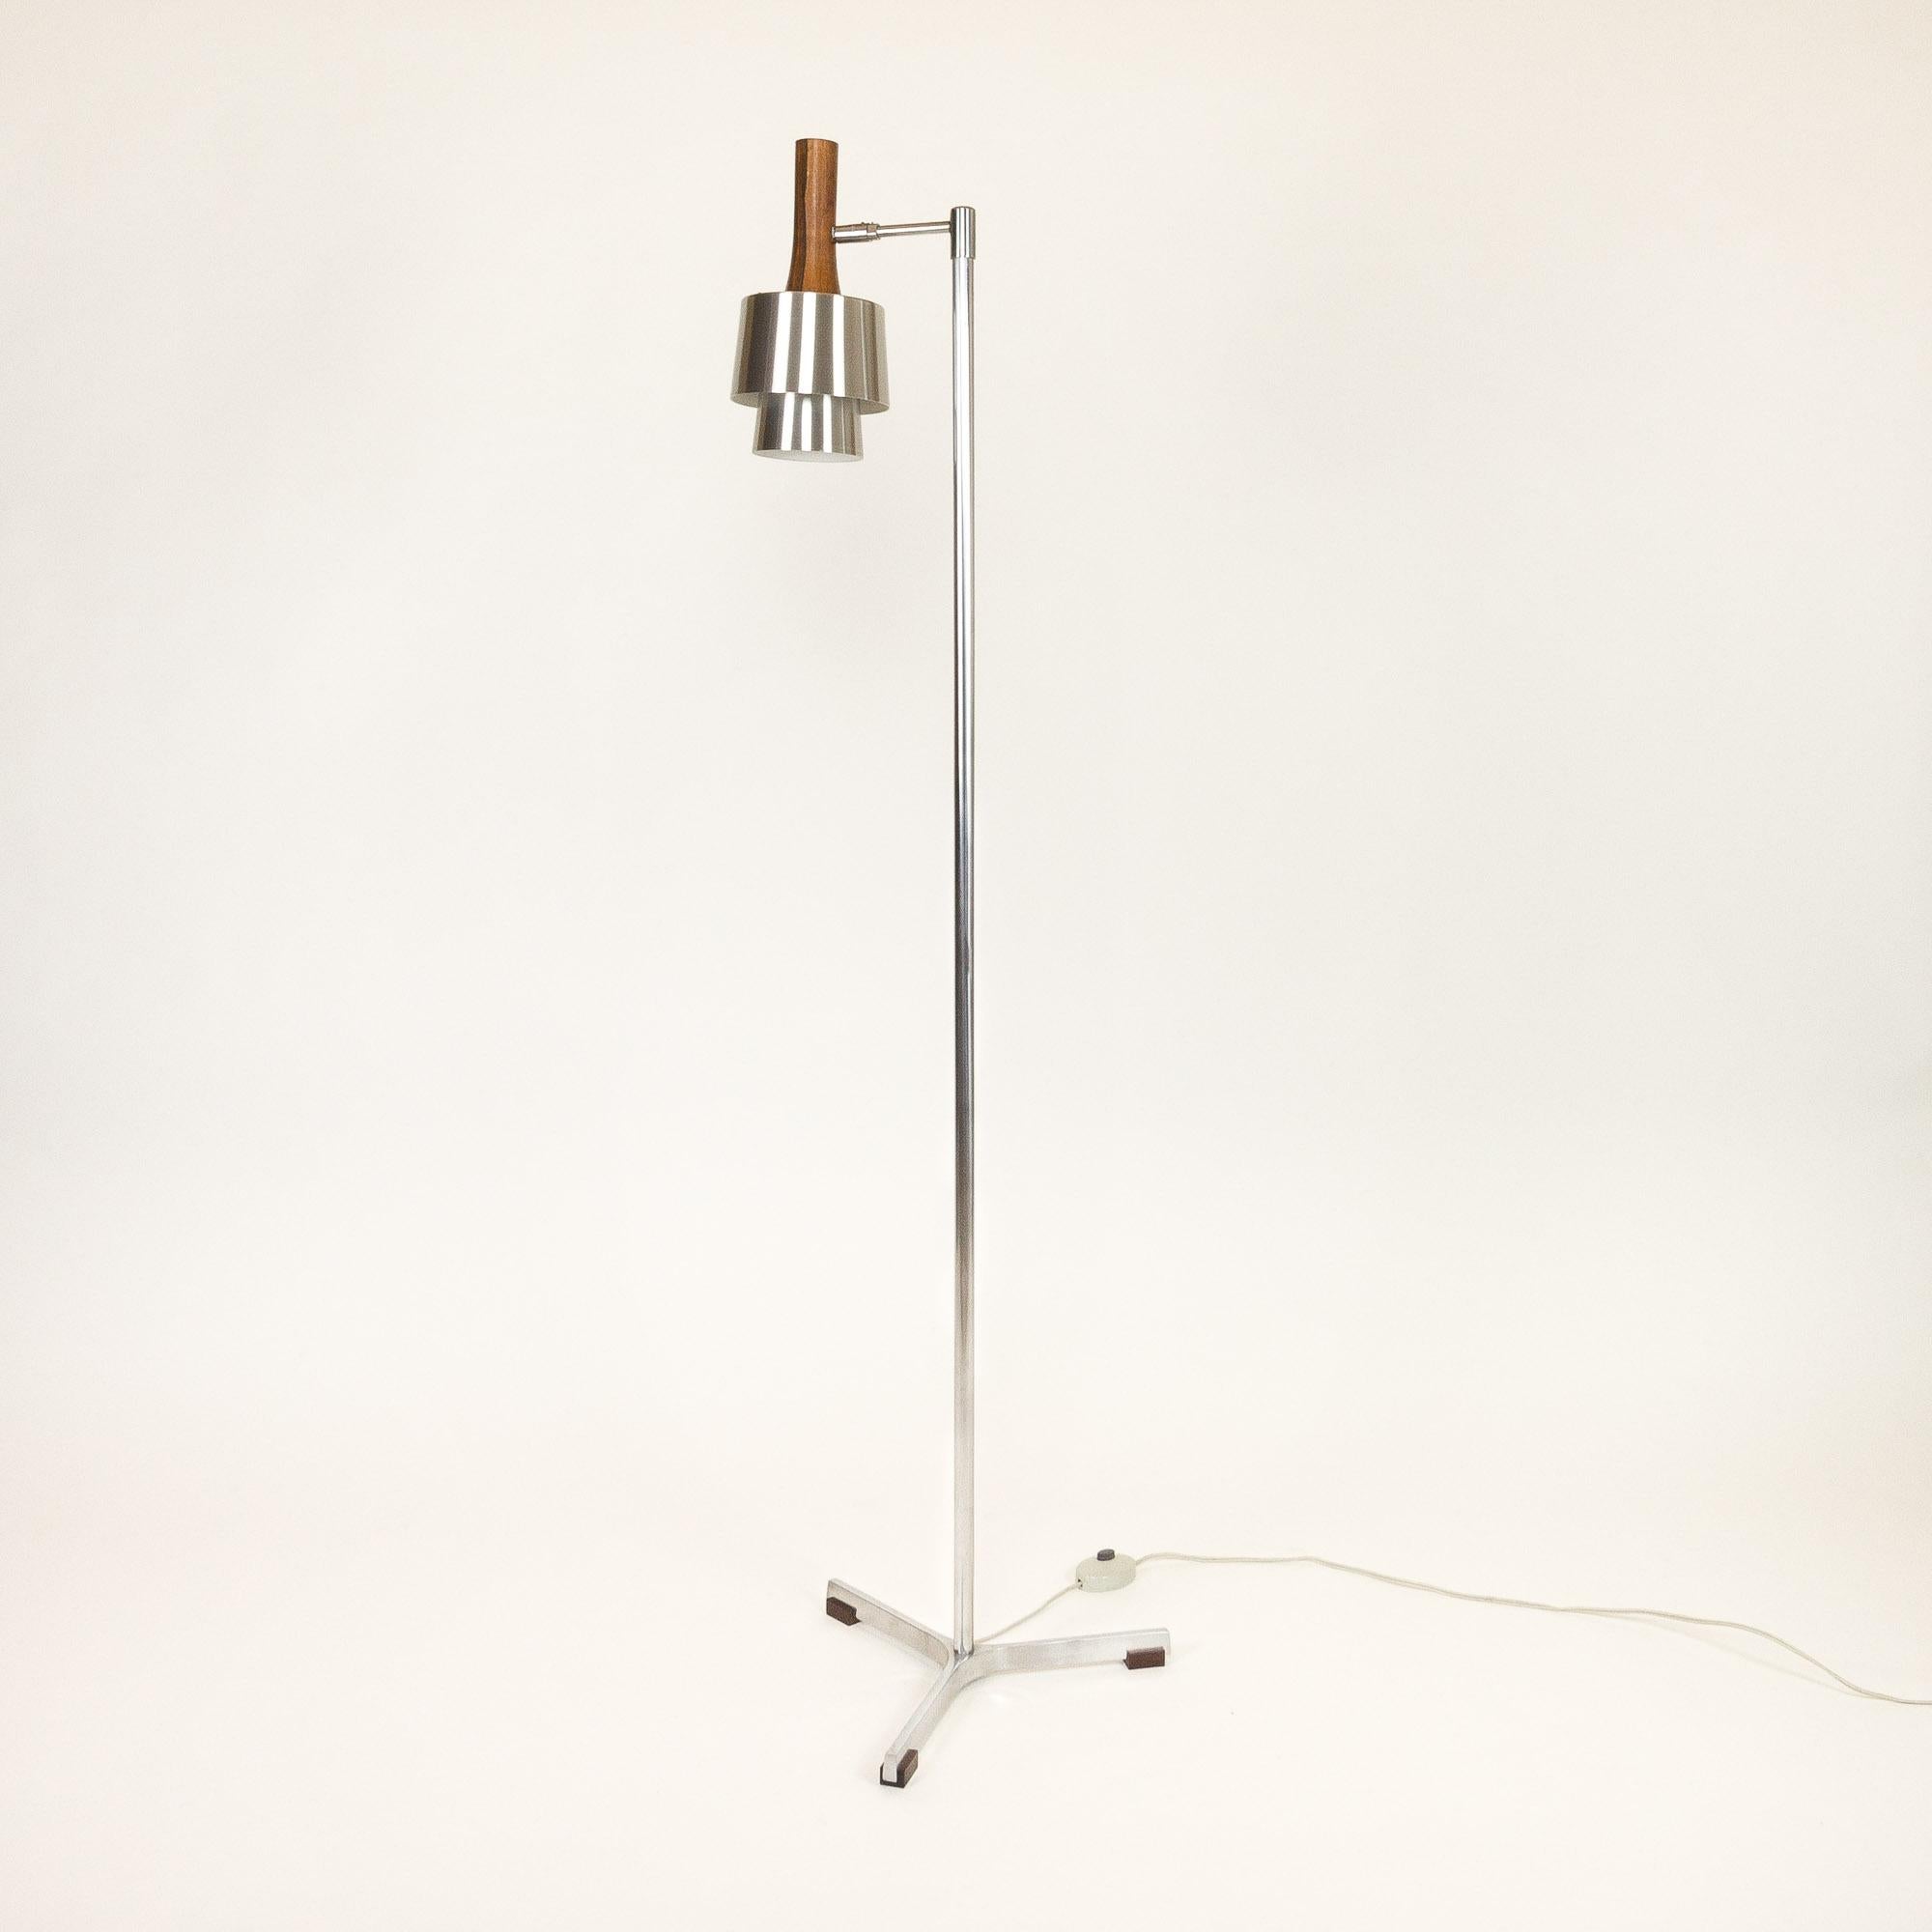 Model 294 standard floor lamp in stainless steel and rosewood. Designed by Jo Hammerborg and manufactured by Fog & Mørup, Denmark, 1960s.